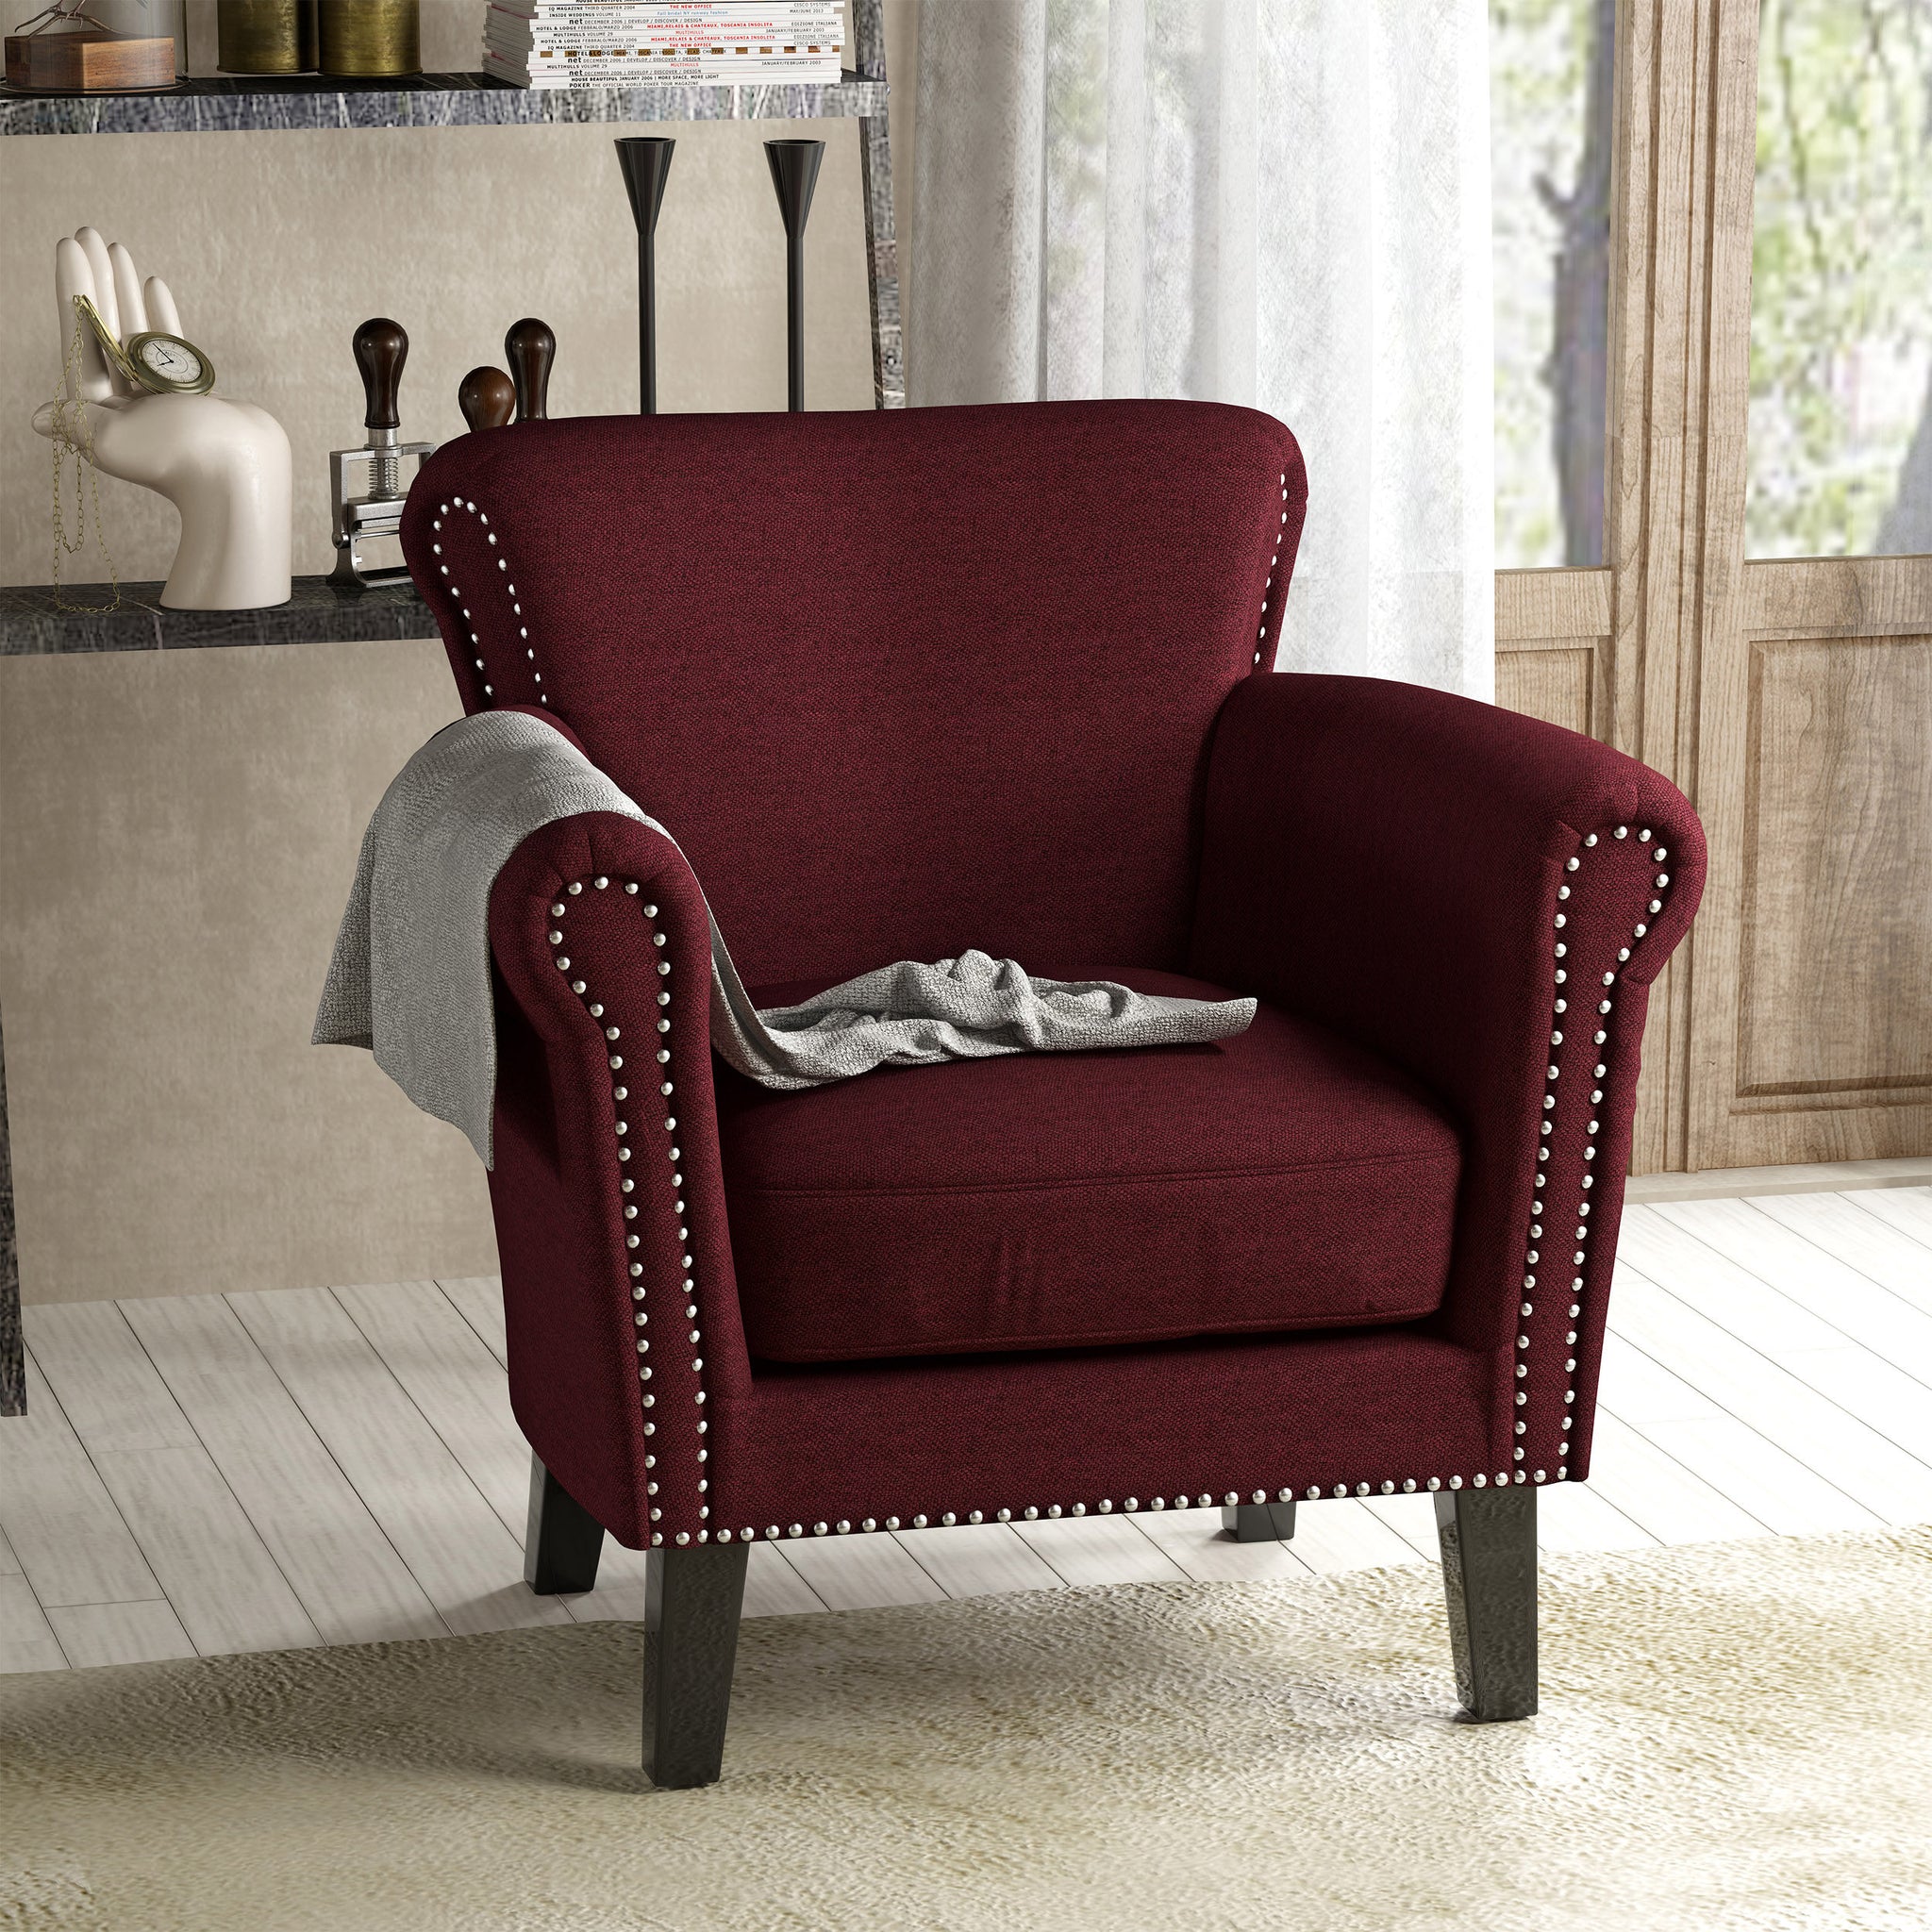 Brice Contemporary Scroll Arm Club Chair with Nailhead Trim in Wine Color